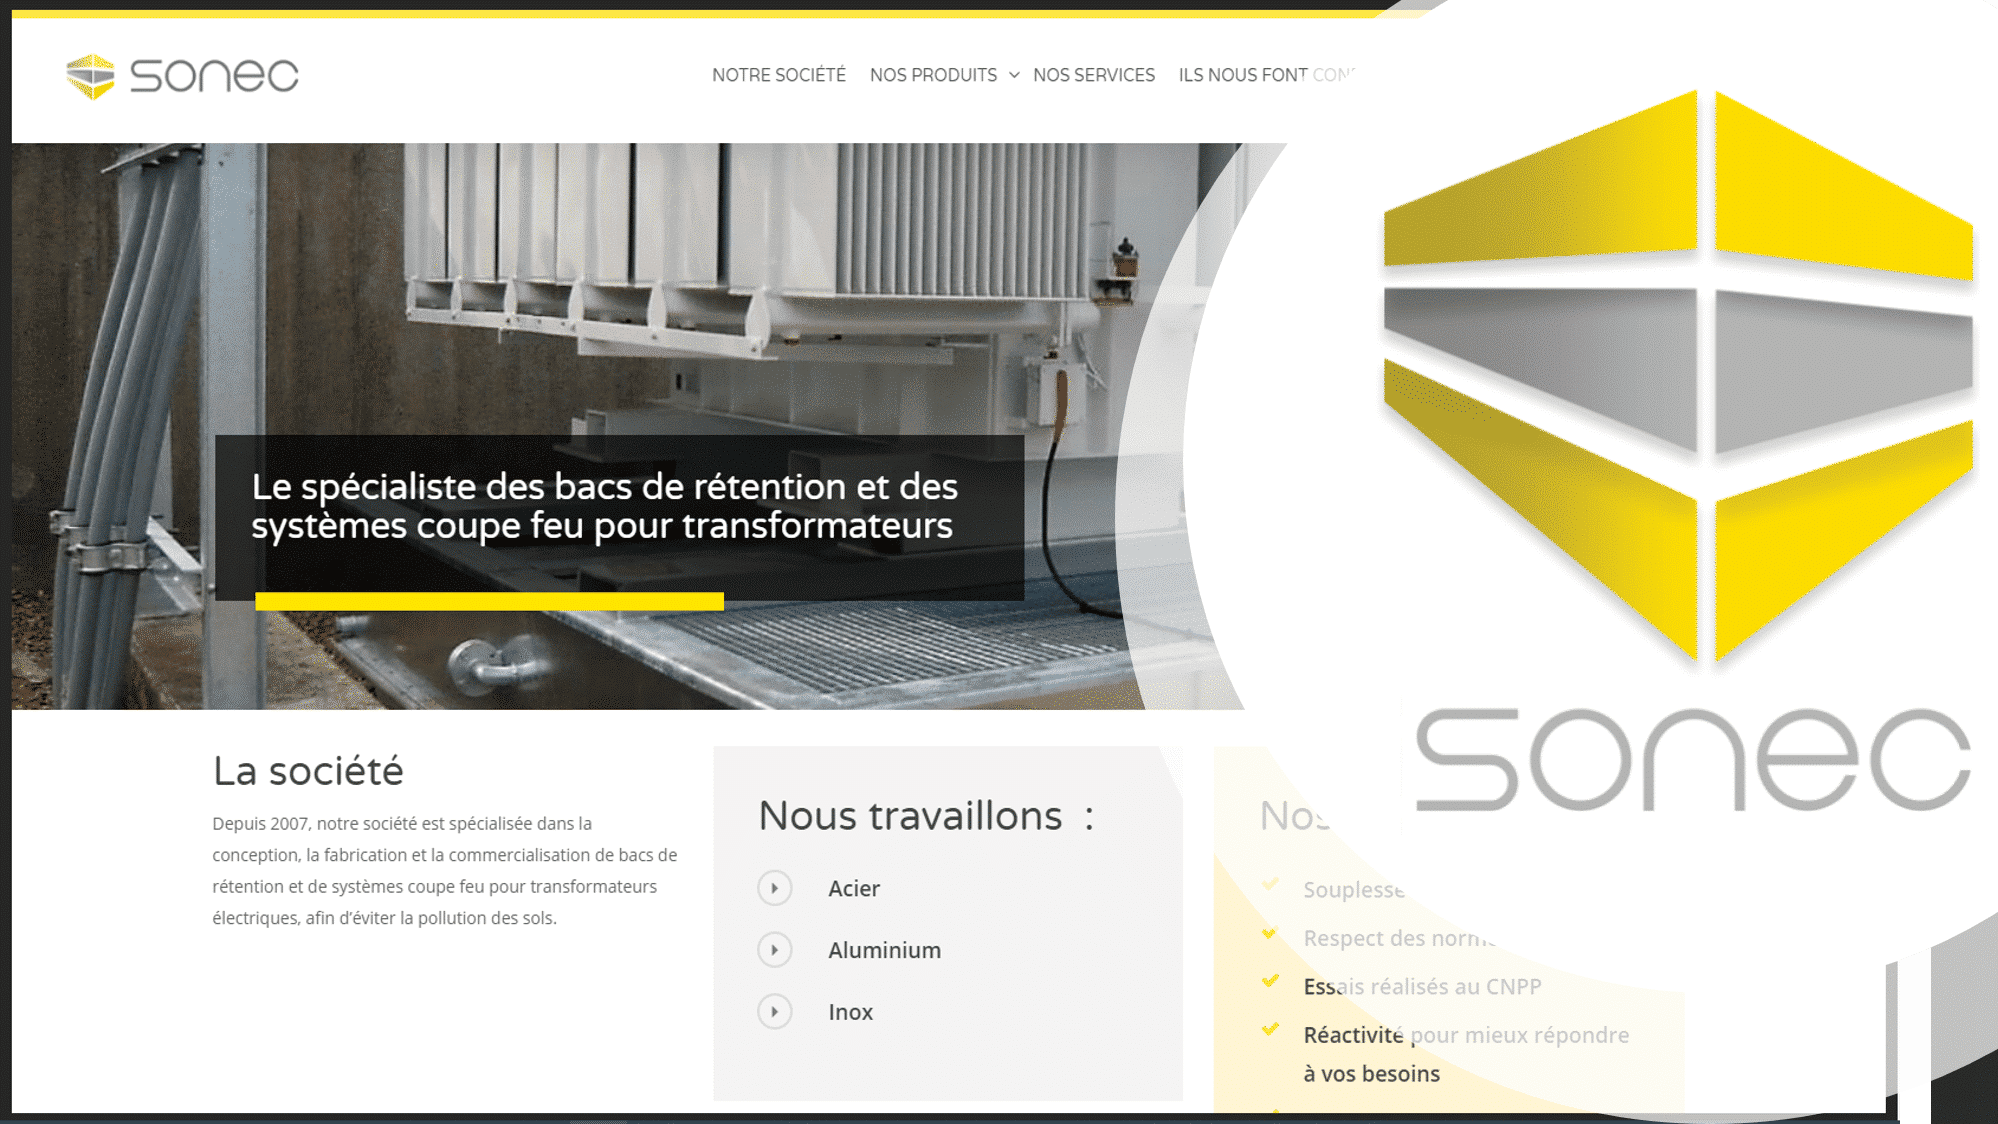 SONEC specialises in the design, manufacture and marketing of retention tanks and fire-stop systems for electrical transformers.